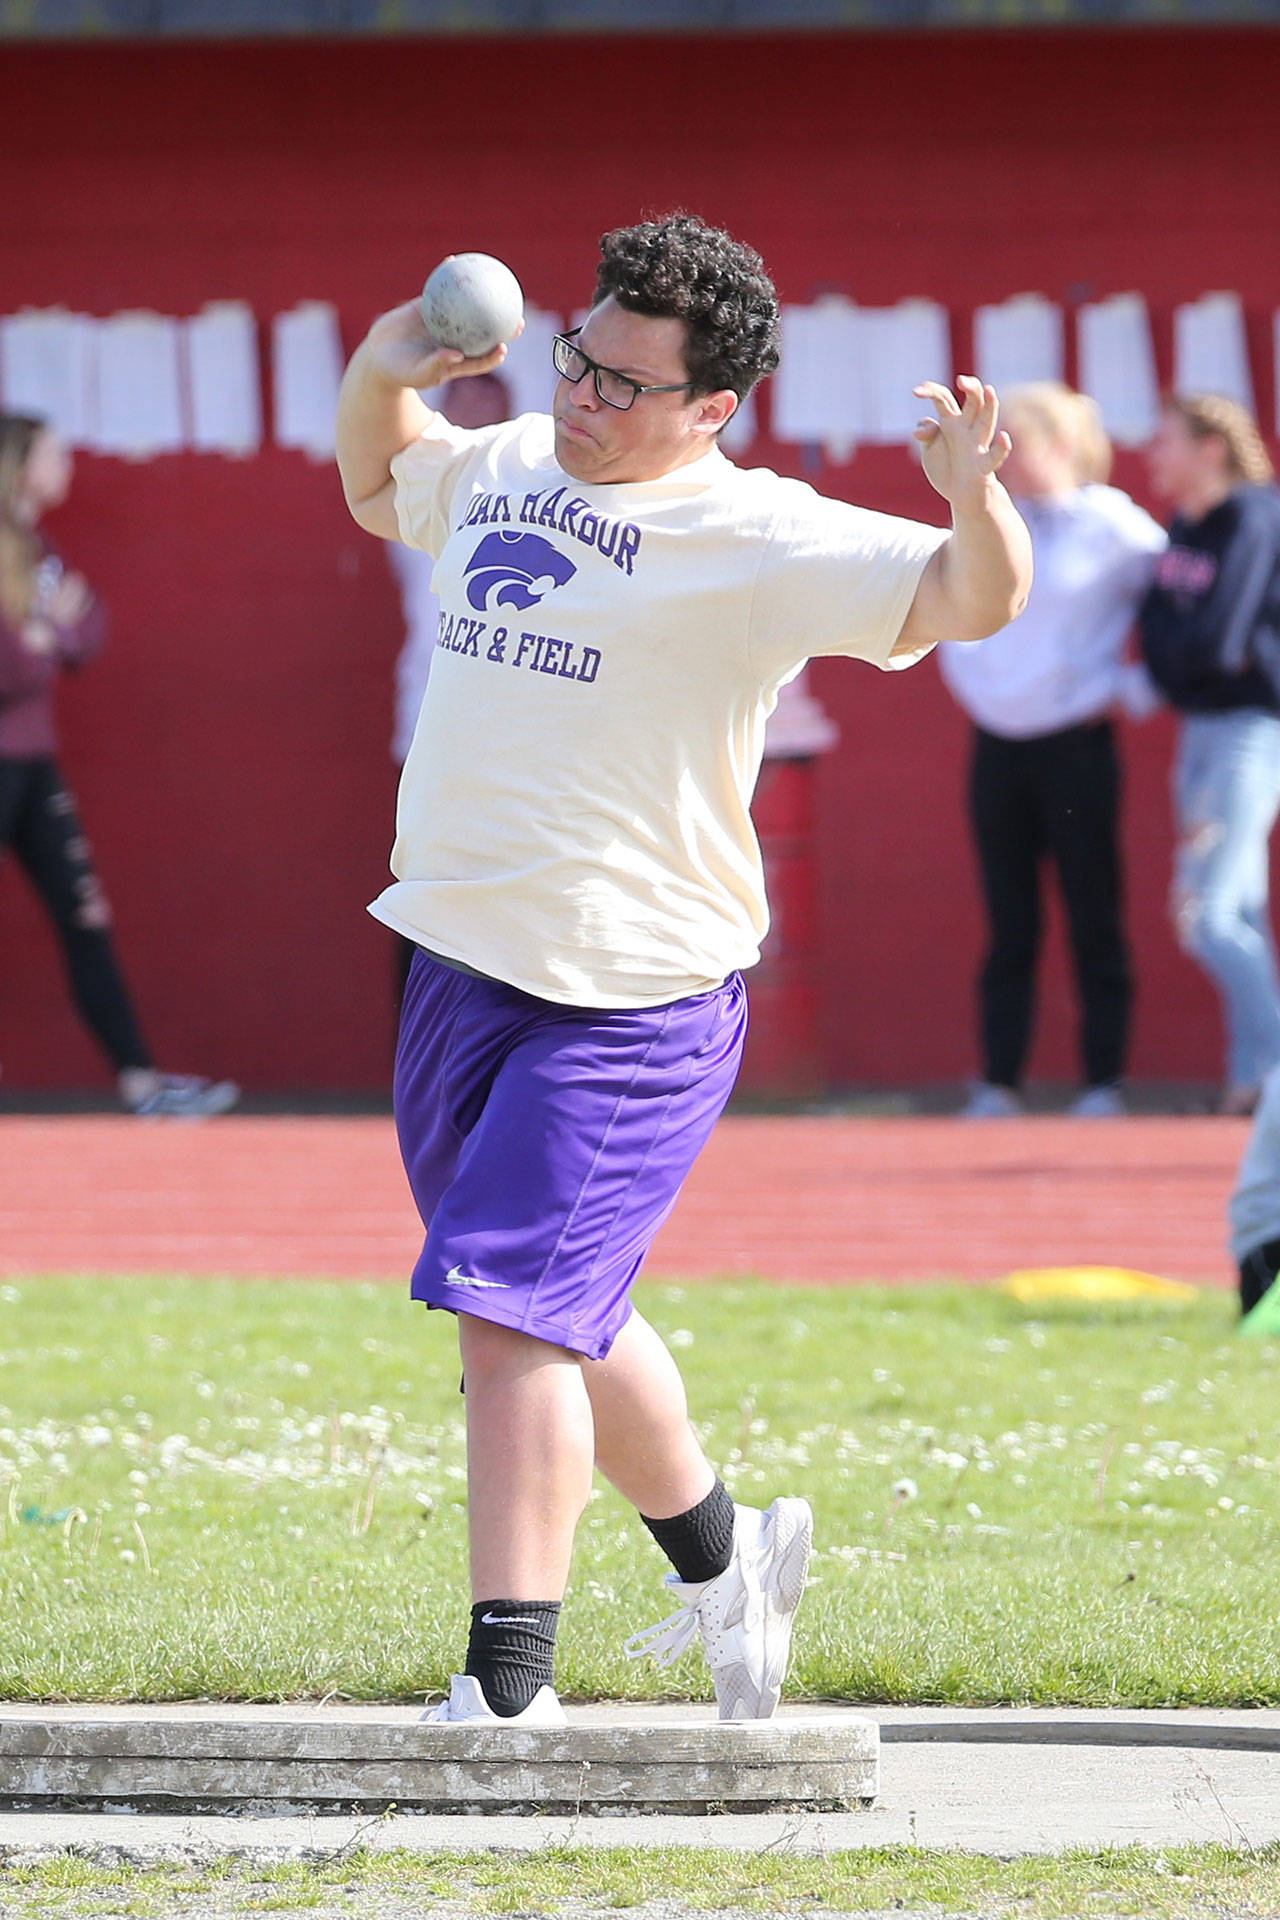 Nathaniel Nunez will lead a strong group of Oak Harbor throwers this spring. (Photo by John Fisken)